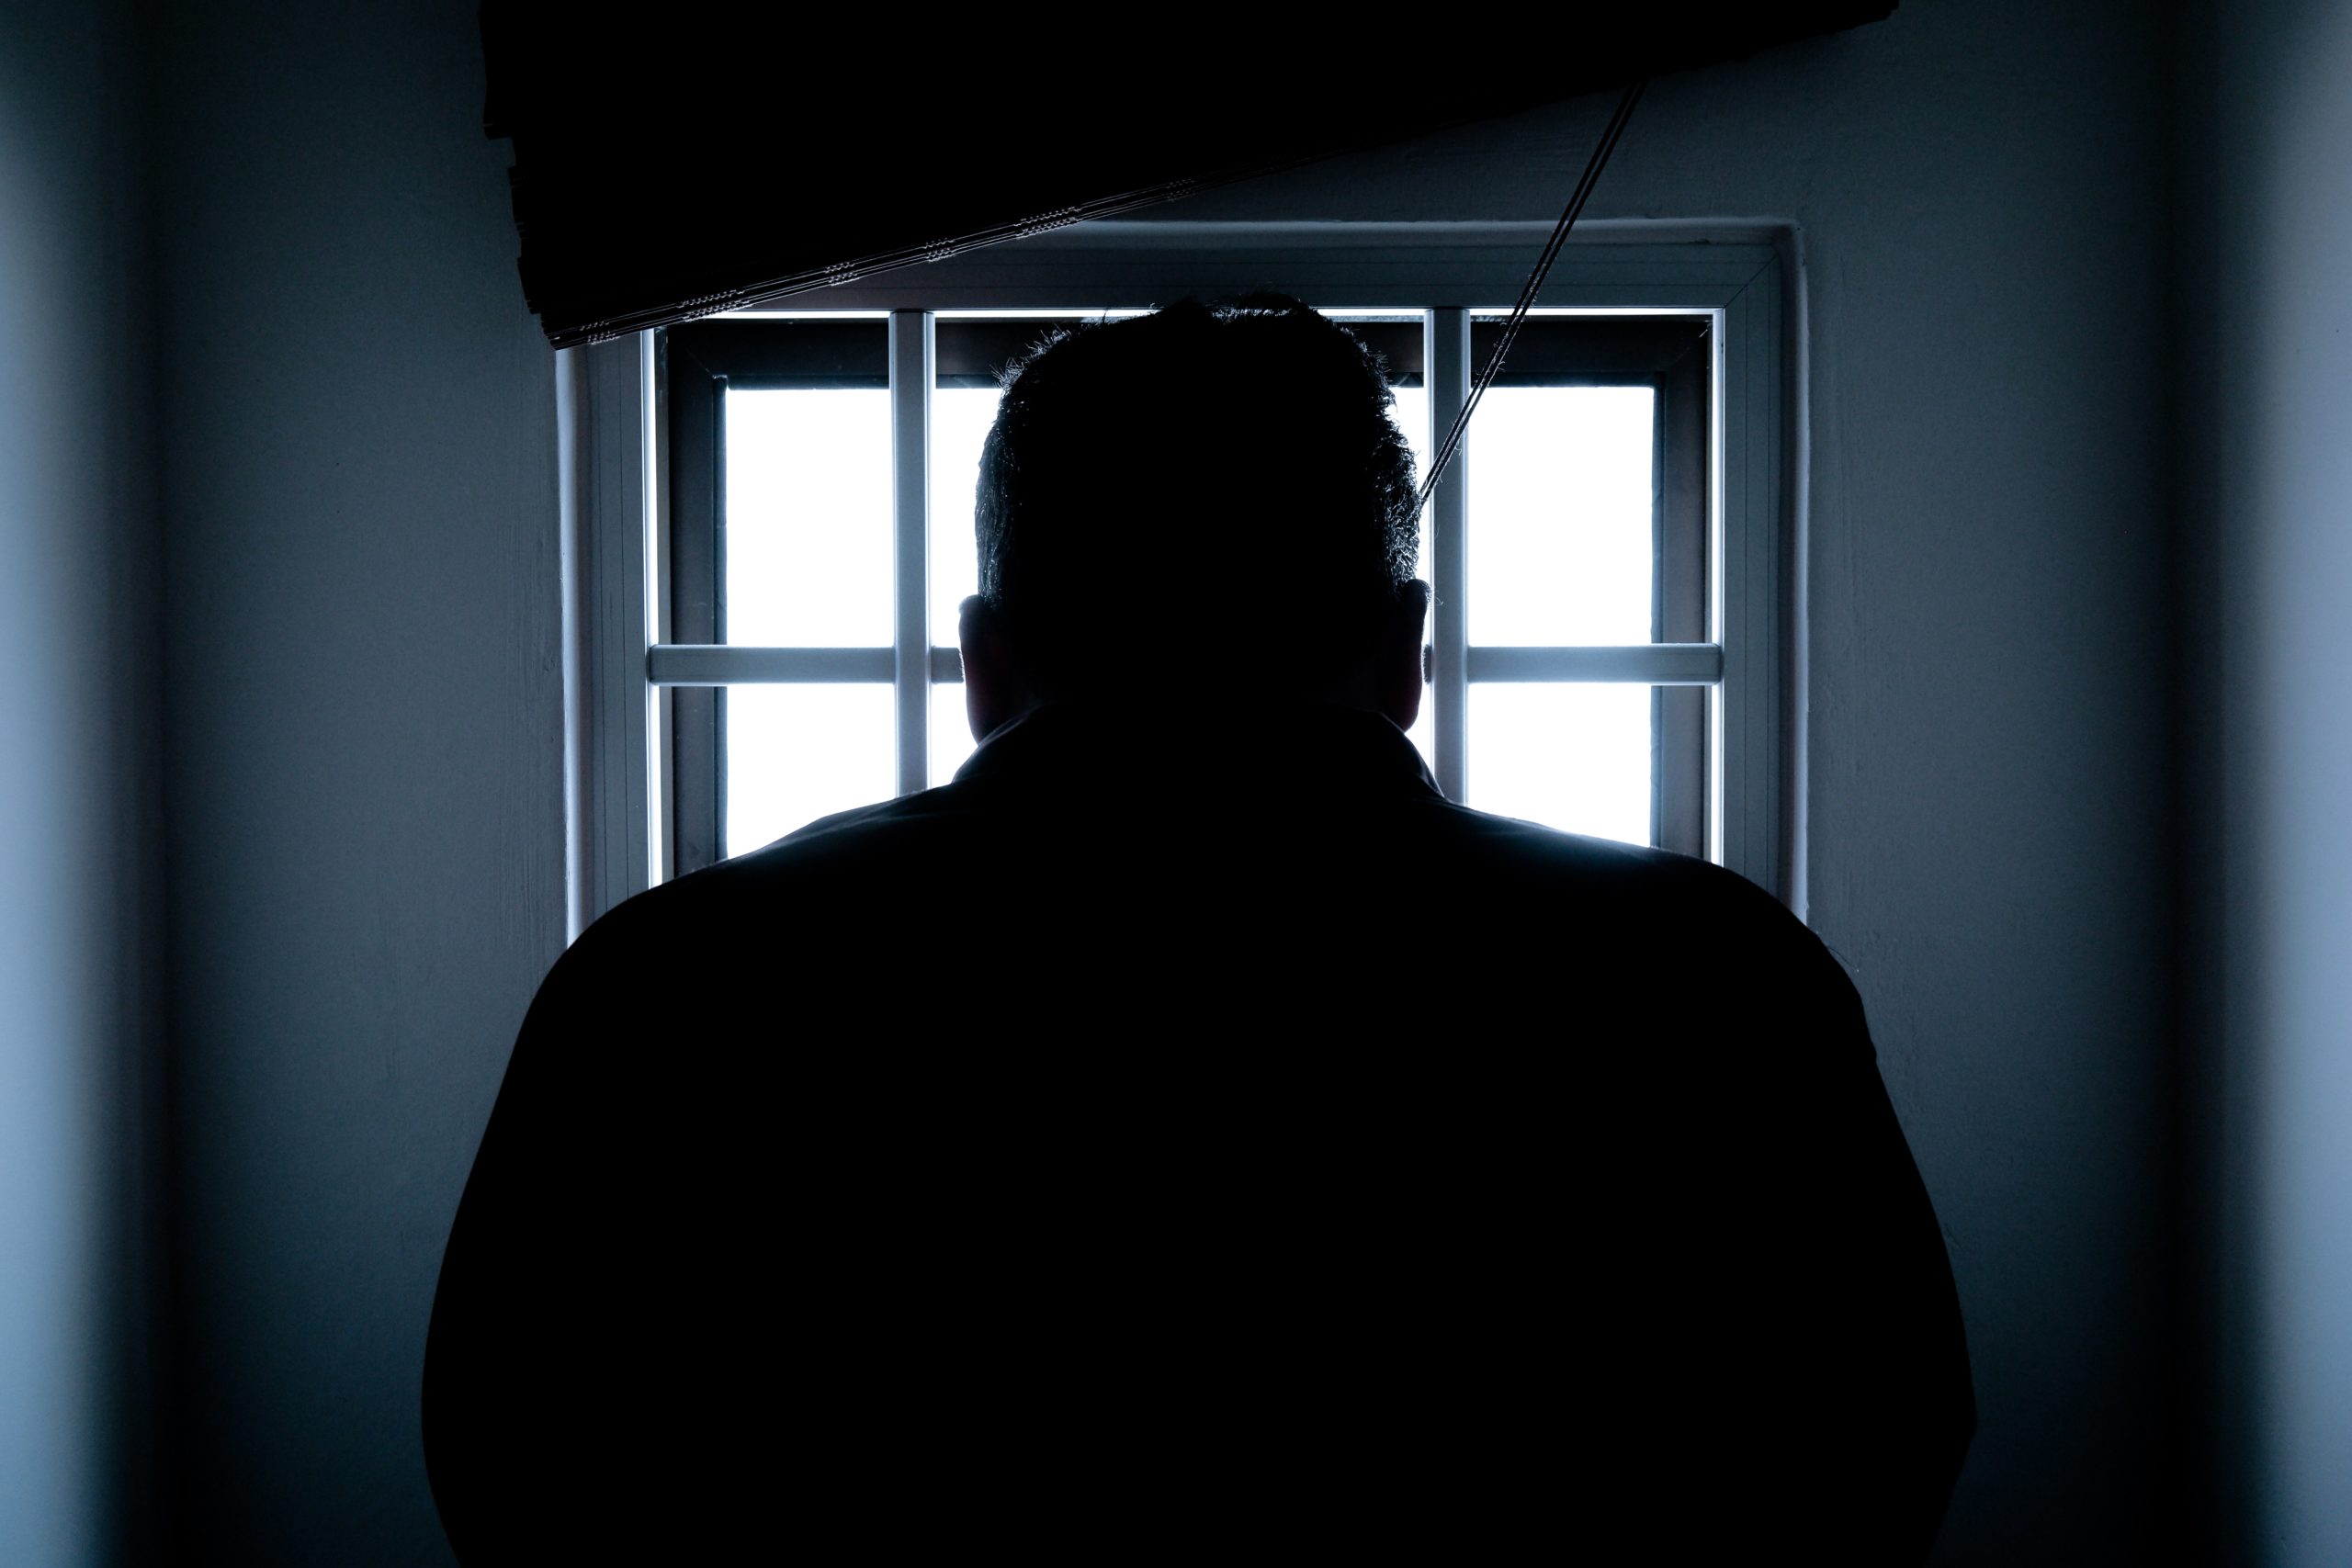 The Harsh Realities of Solitary Confinement